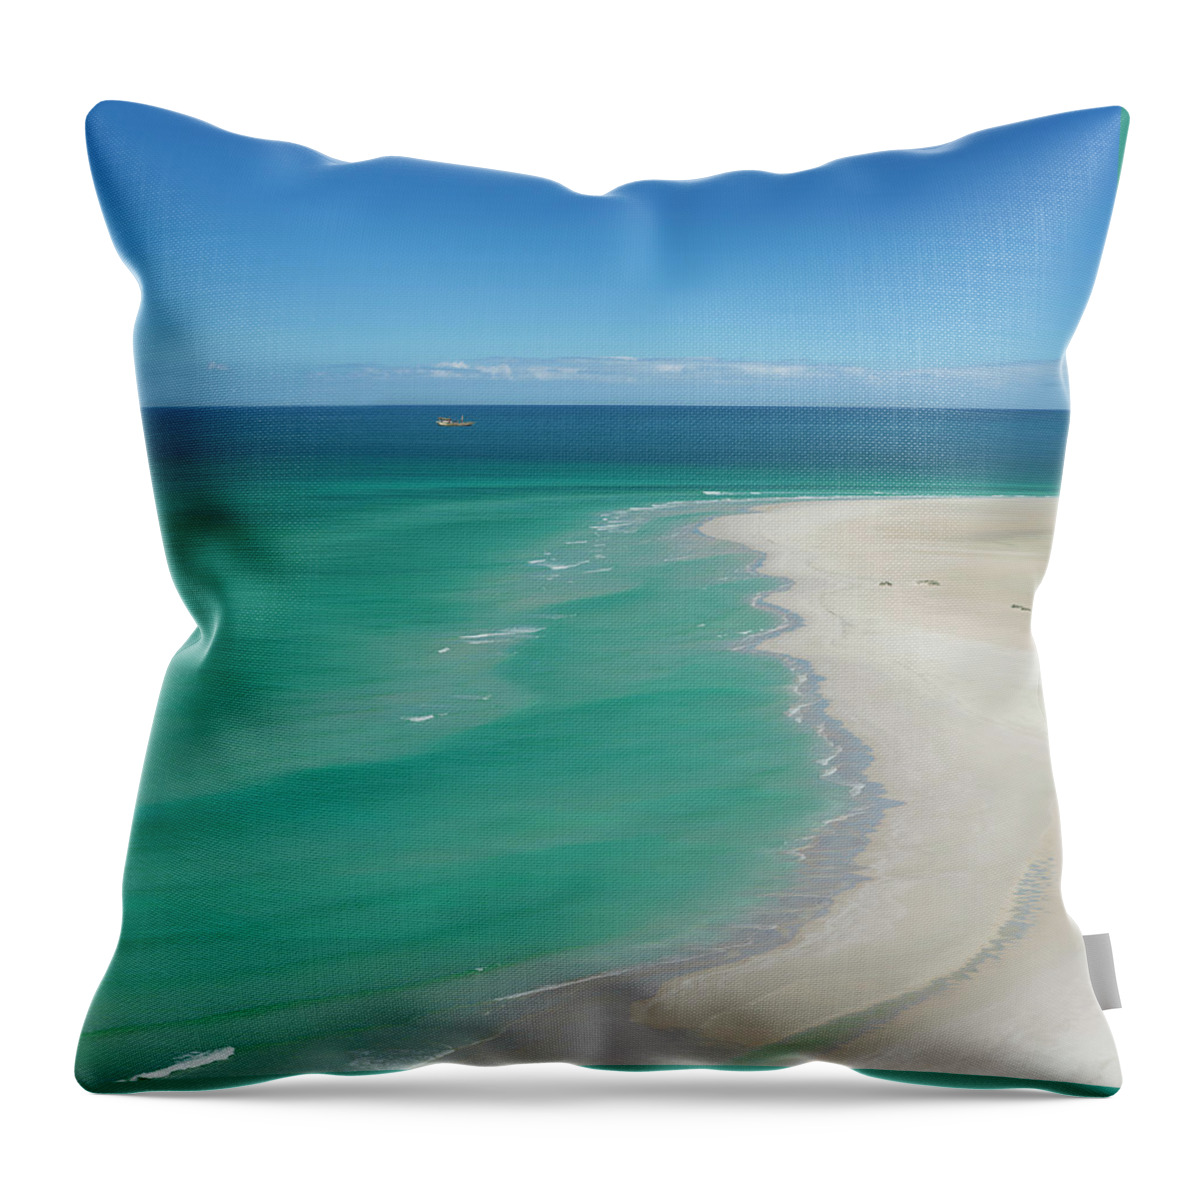 Tranquility Throw Pillow featuring the photograph View Of Ocean And Beach by John M Lund Photography Inc